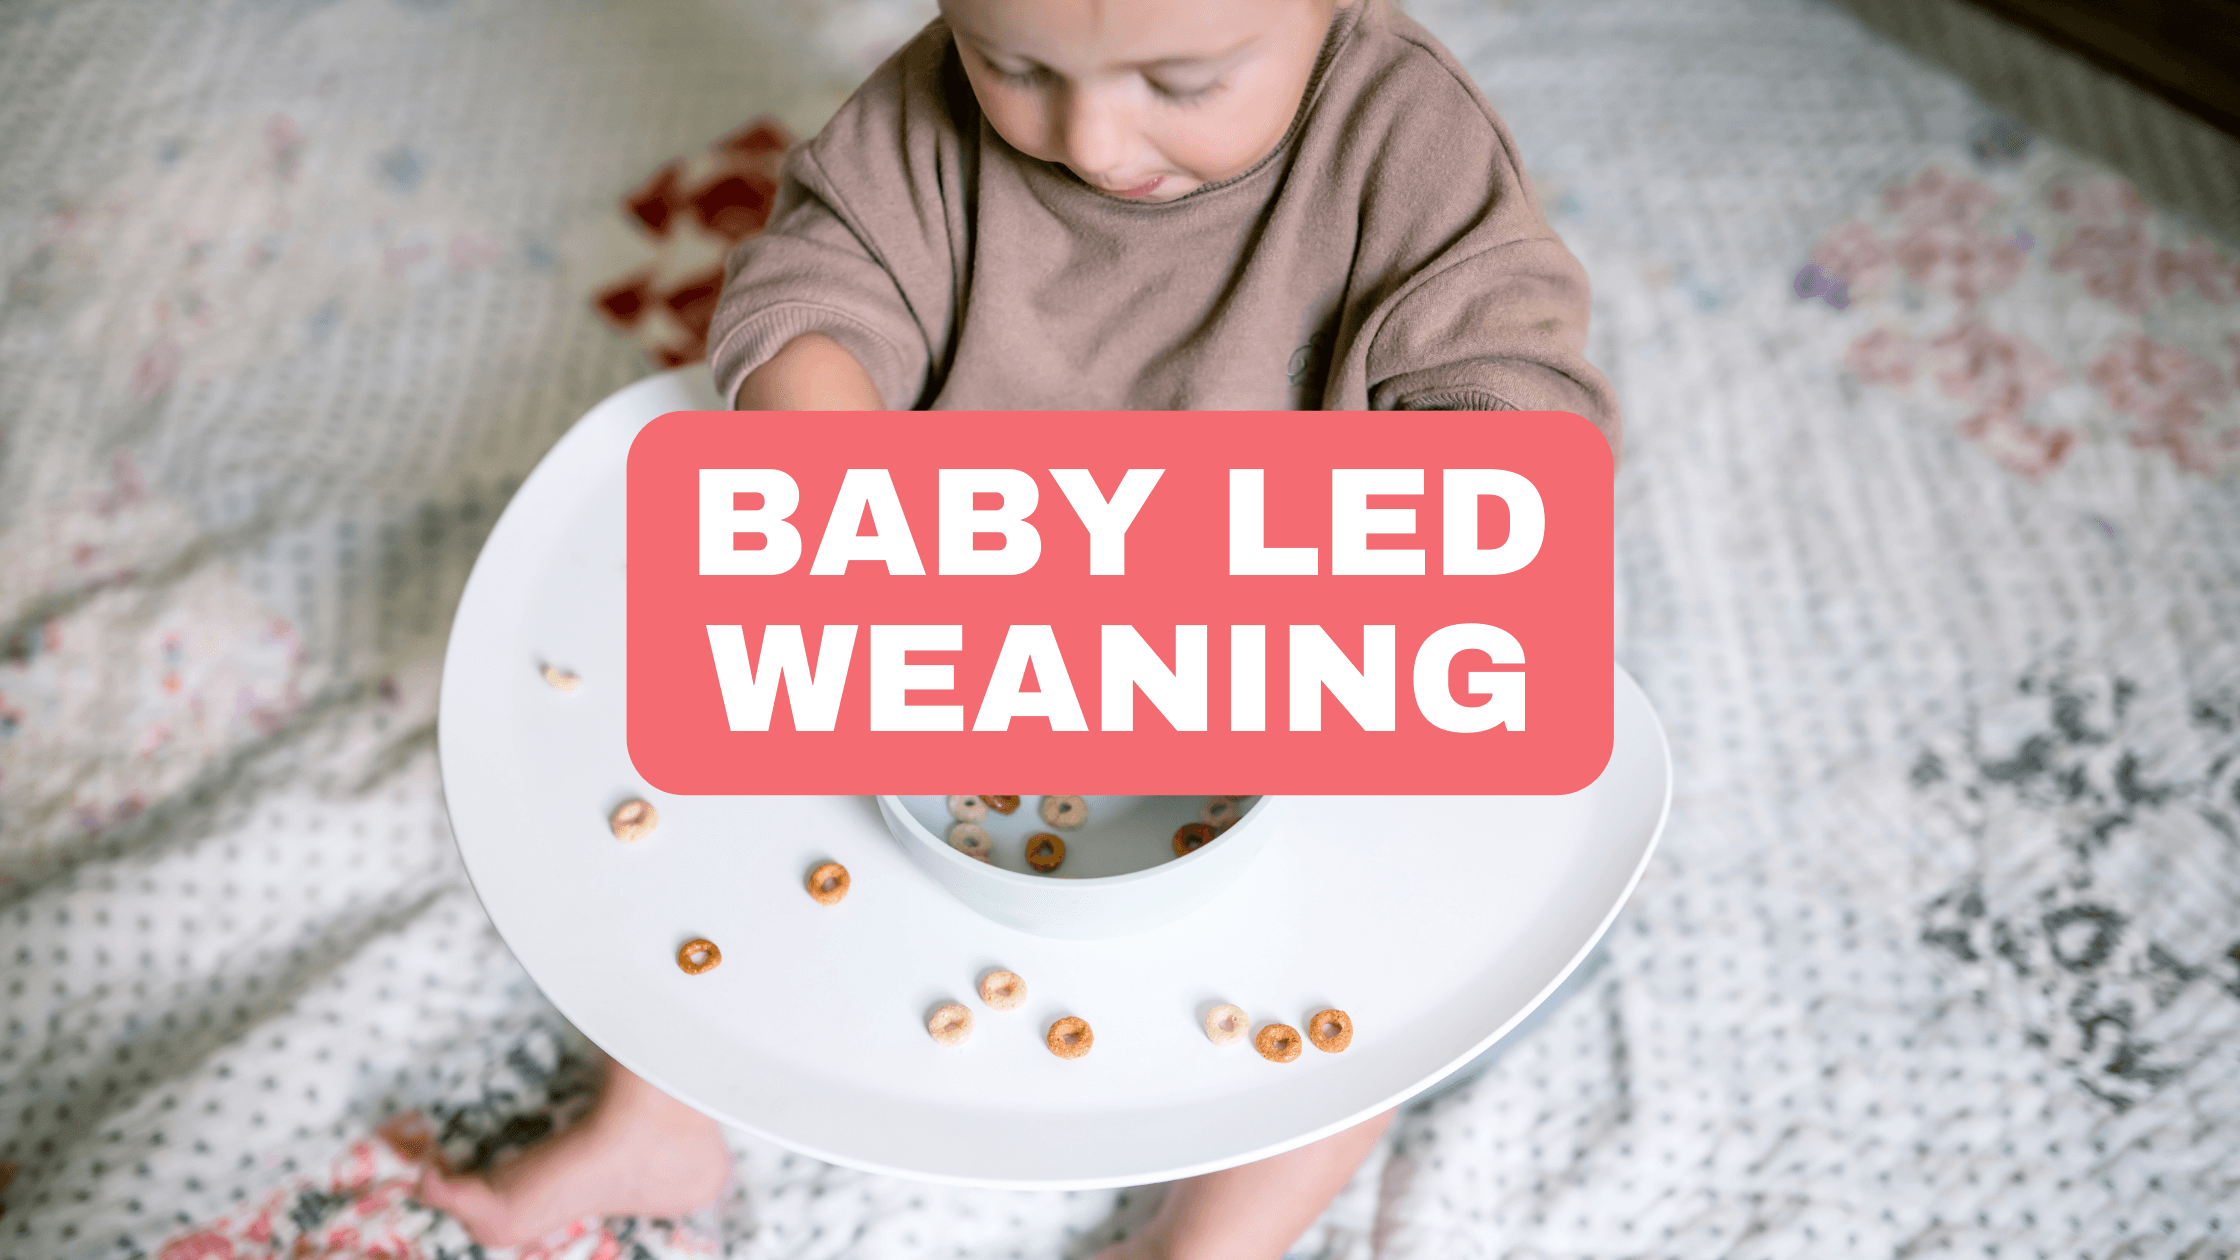 Best products for baby led weaning to start solids in 2023